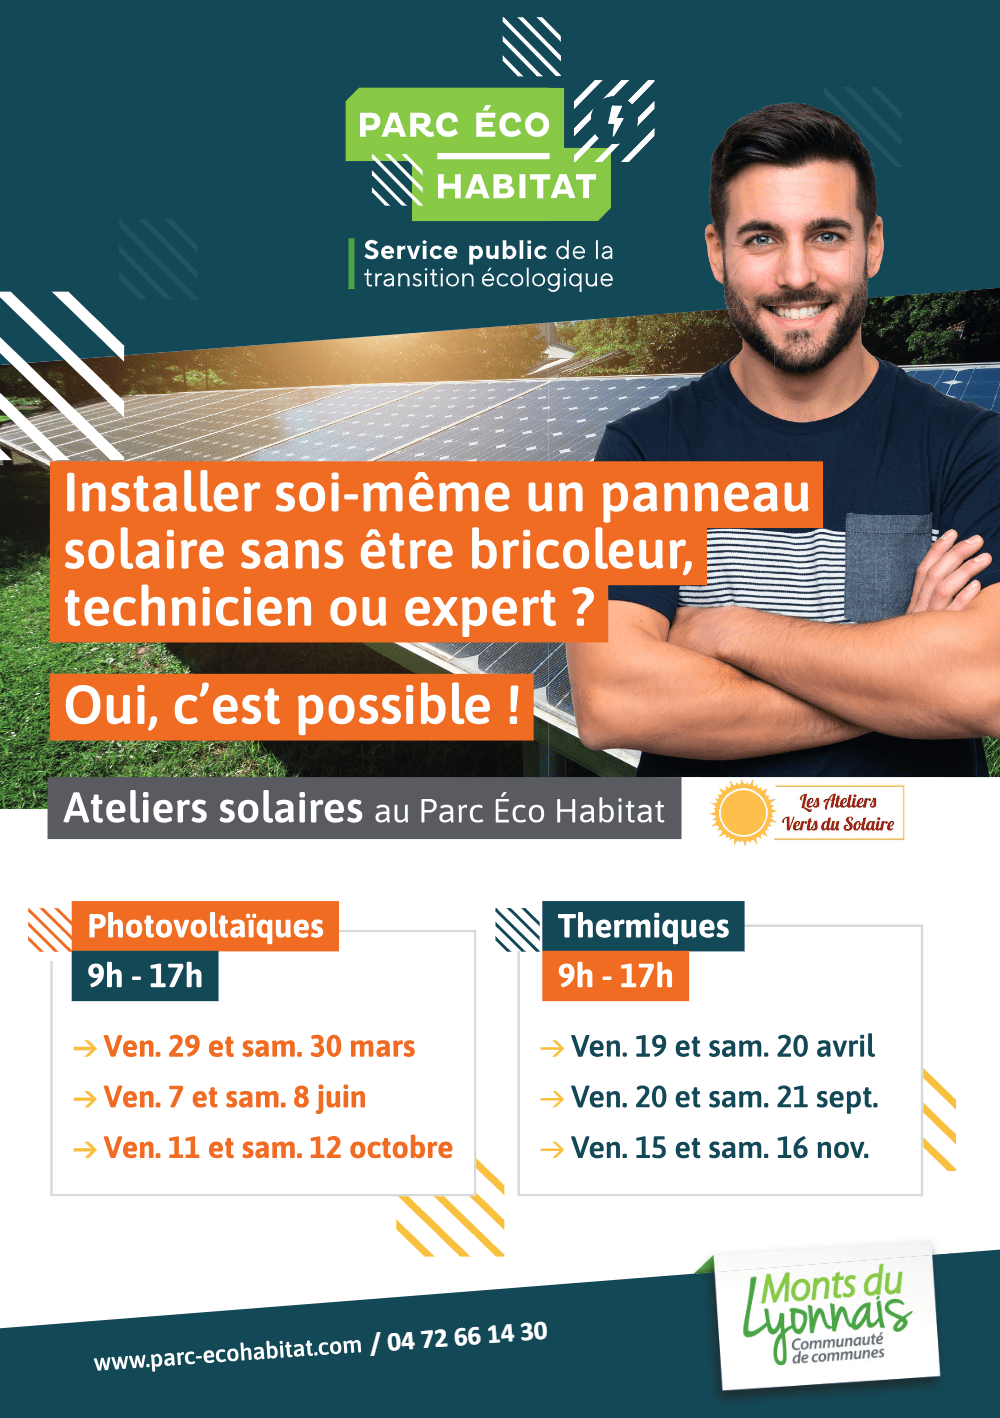 You are currently viewing Ateliers sur solaire photovoltaïque